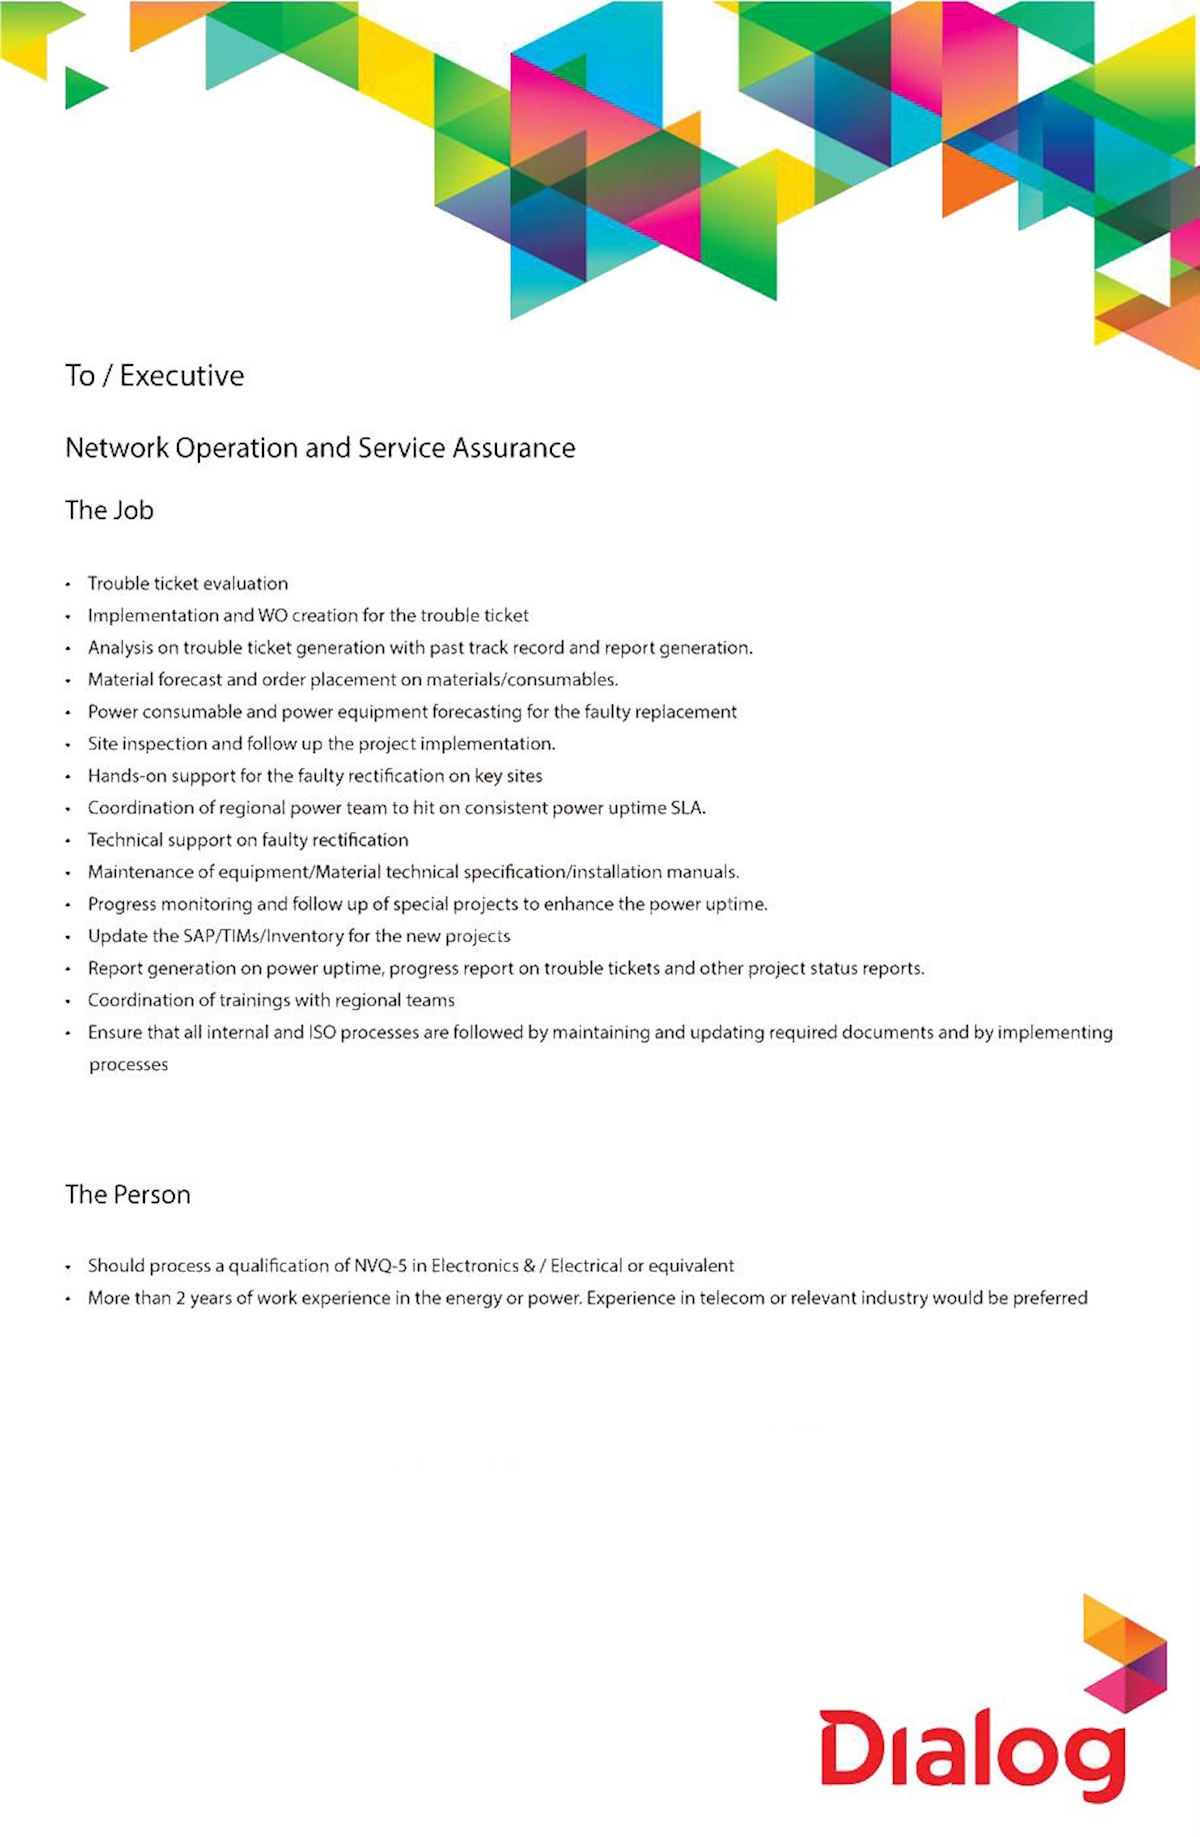 To/Executive - Network Operation and Service Assurance